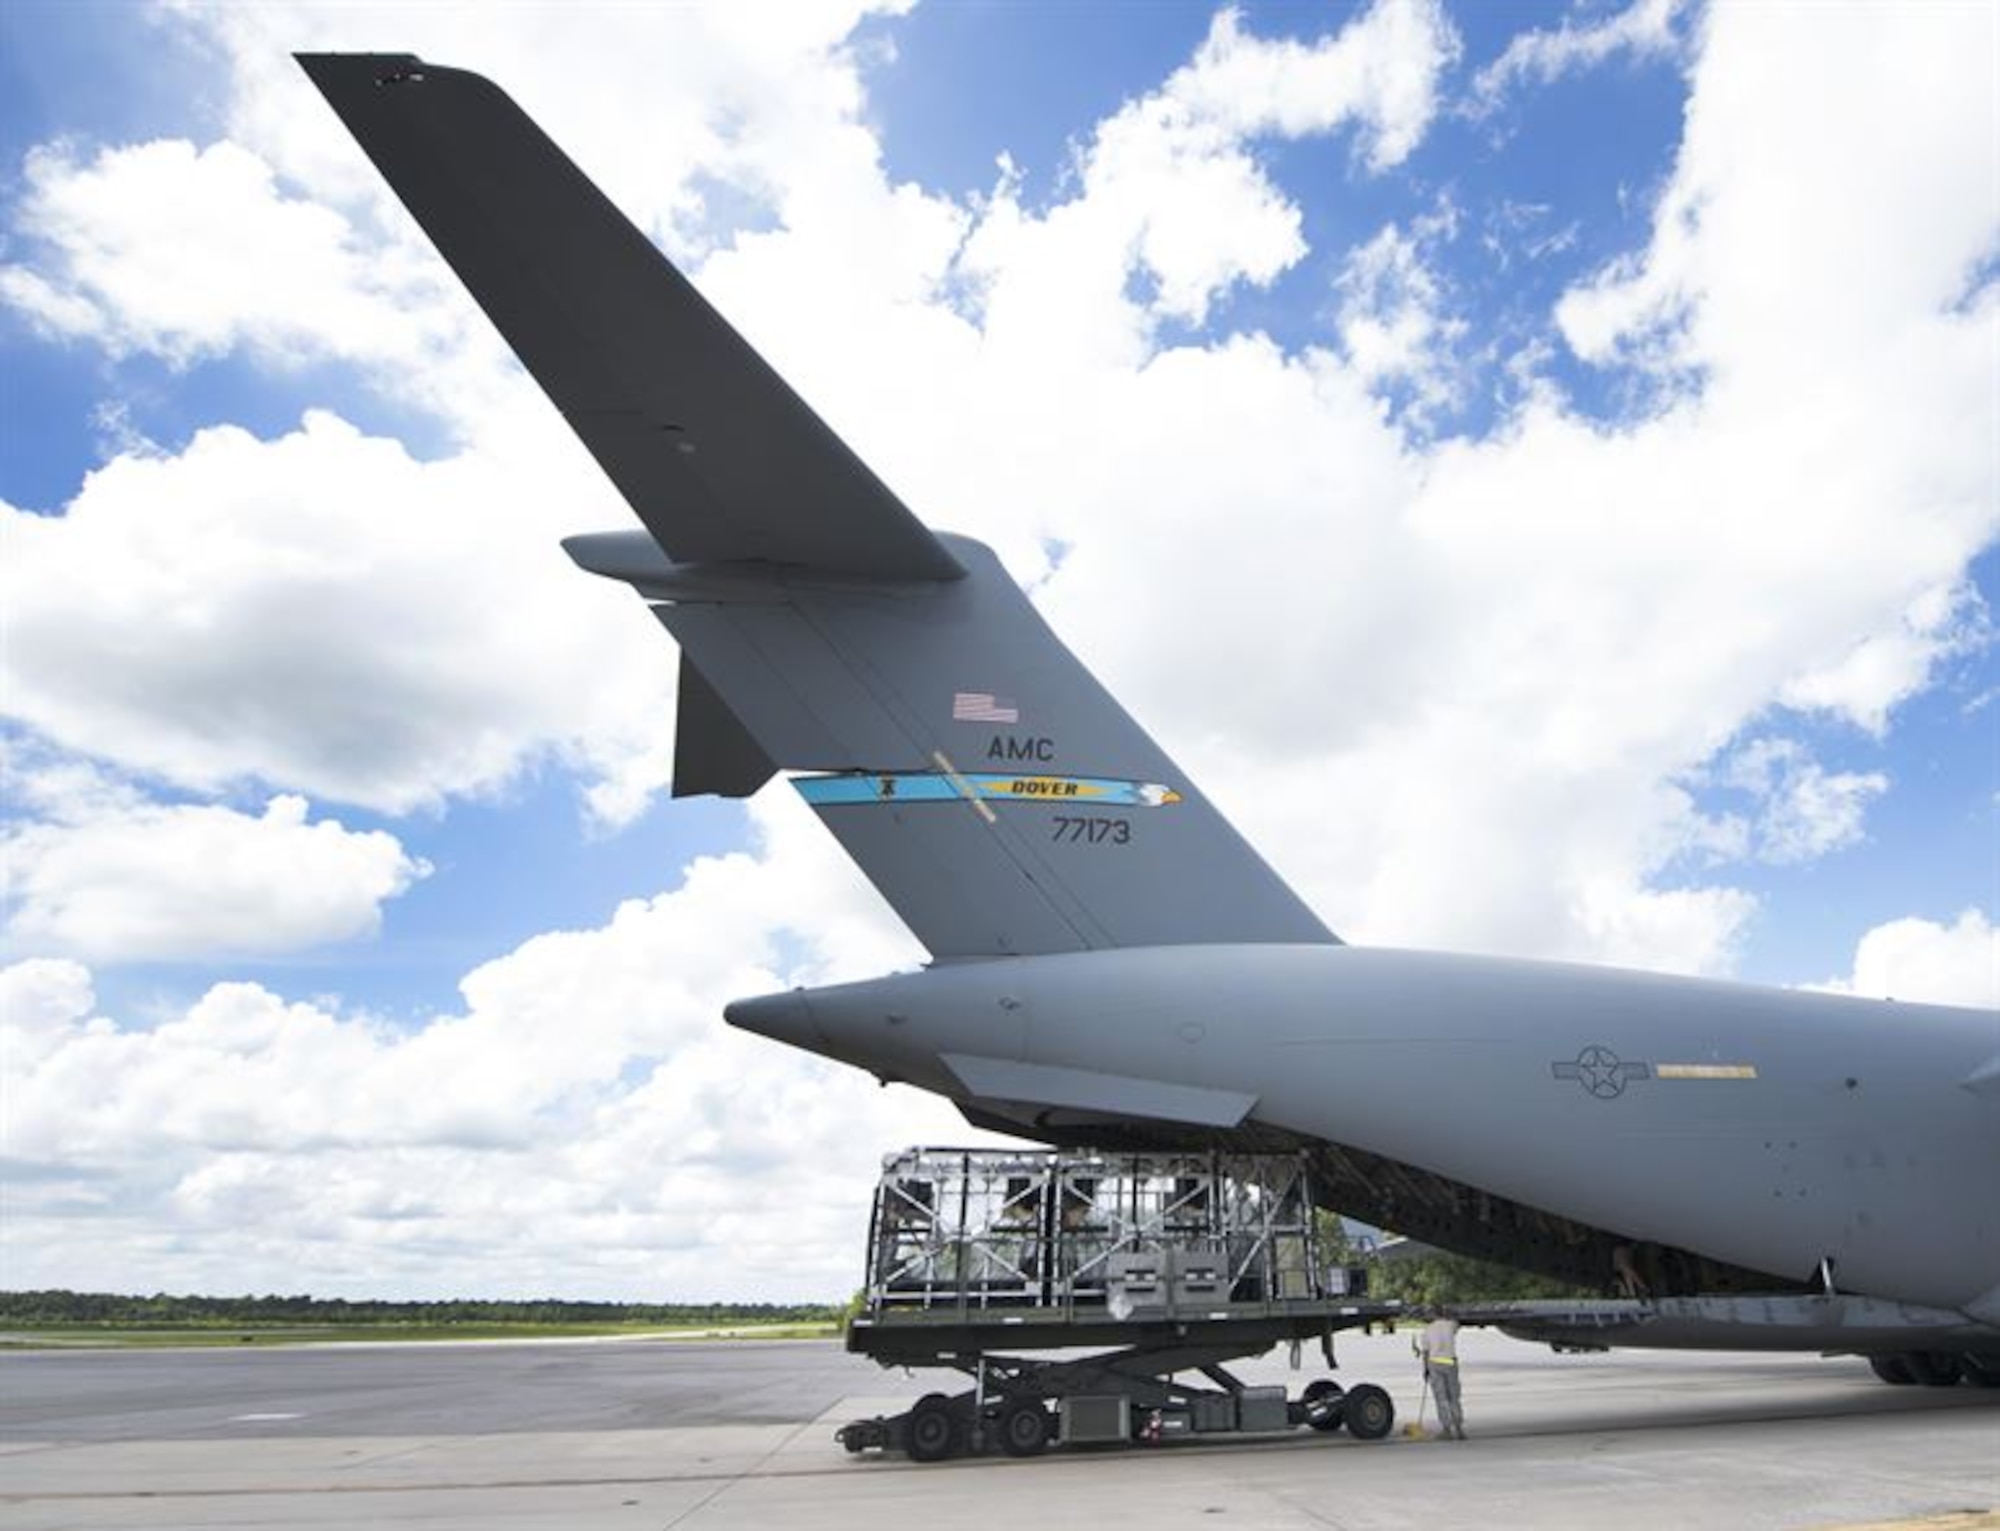 A Transportation Isolation System (TIS) is loaded onto a C-17 Globemaster III aircraft during Exercise Mobilty Solace at Joint Base Charleston, S.C., Aug. 15, 2016. Mobility Solace provides Air Mobility Command, working with joint partners, the opportunity to evaluate the protocols and operational sequences of moving multiple patients exposed or infected with Ebola using the TIS, while also minimizing the risks to aircrew, medical attendants and the airframe. The TIS is a modular, scalable system, composed of at least one isolation pallet for patient transportation and care, one pallet configured as an "antechamber" to provide medical members with an enclosed space to safely decontaminate and remove their personal protective equipment before exiting. (U.S. Air Force Photo/Airman Megan Munoz)